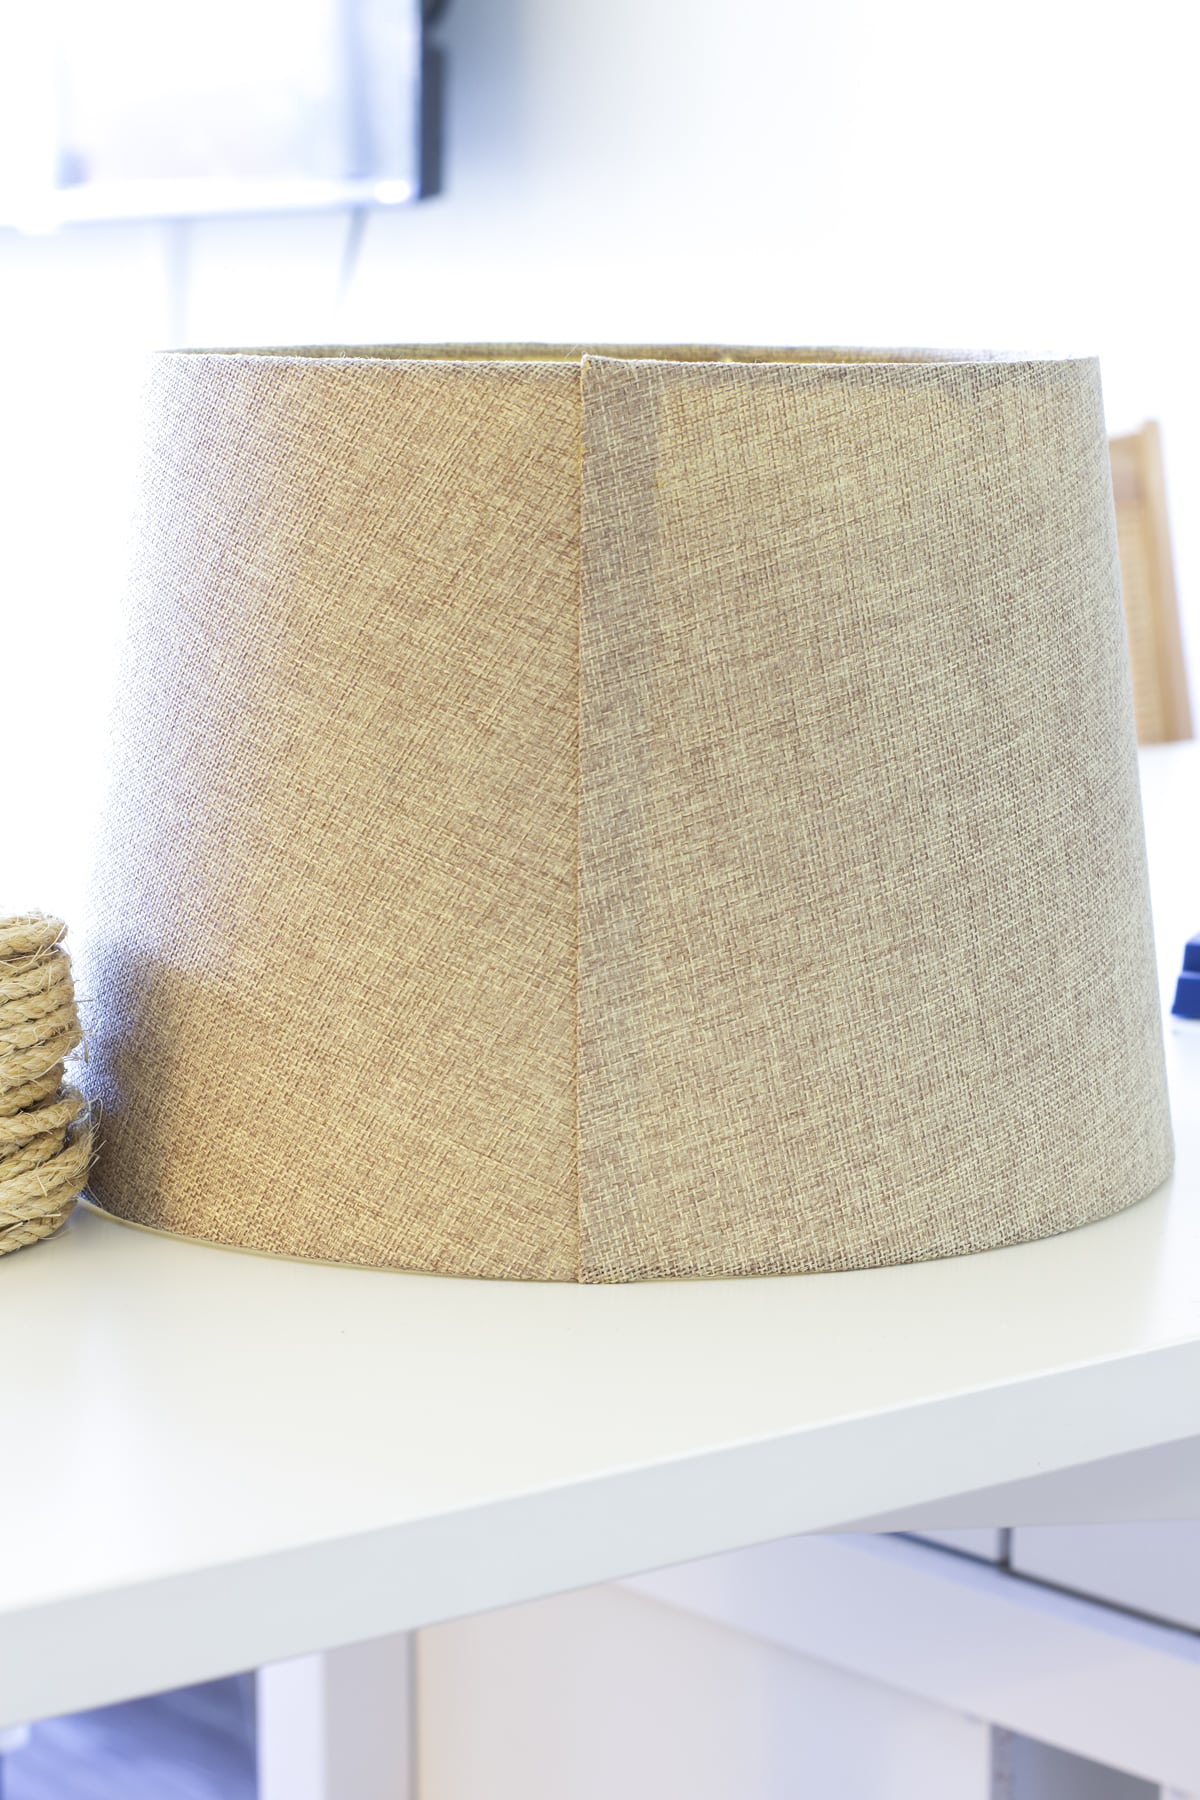 easy diy woven lamp shade with jute cord linen look shade on table